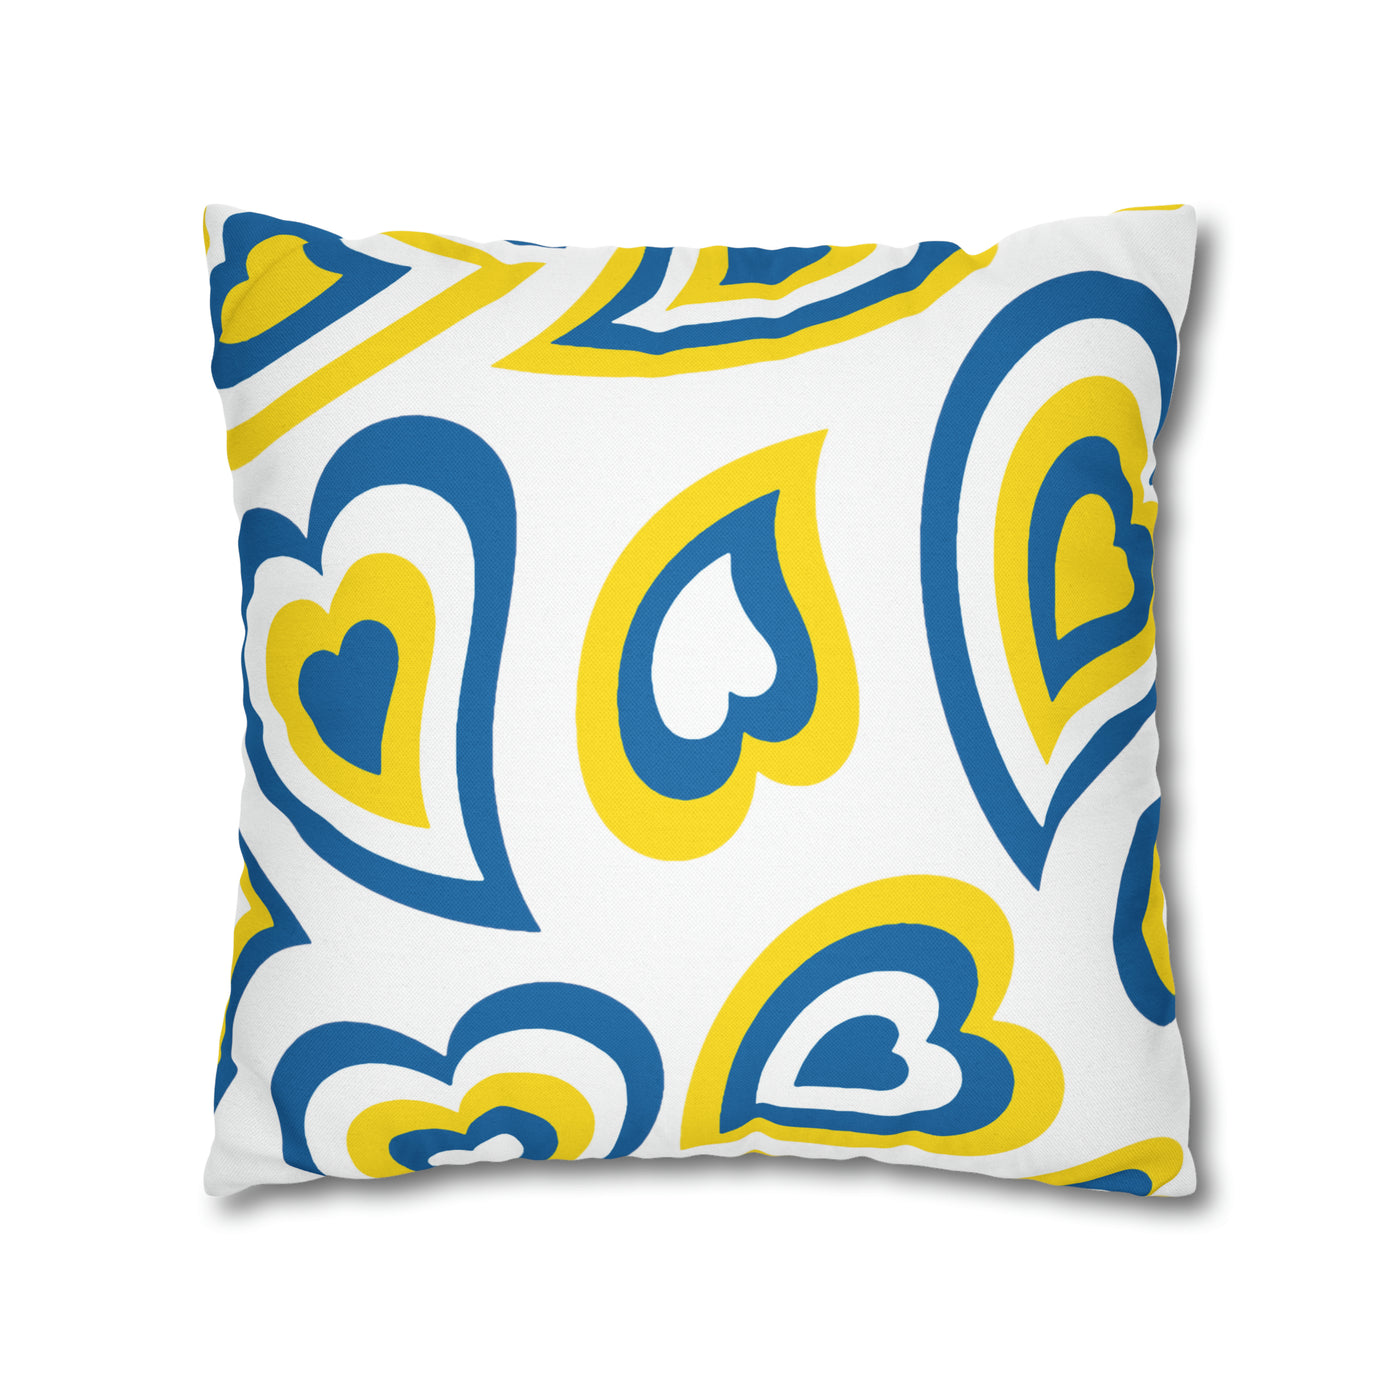 Retro Heart Pillow - Royal and yellow, Heart Pillow, Hearts, Valentine's Day, Delaware, Bed Party Pillow, Sleepaway Camp, dorm decor,